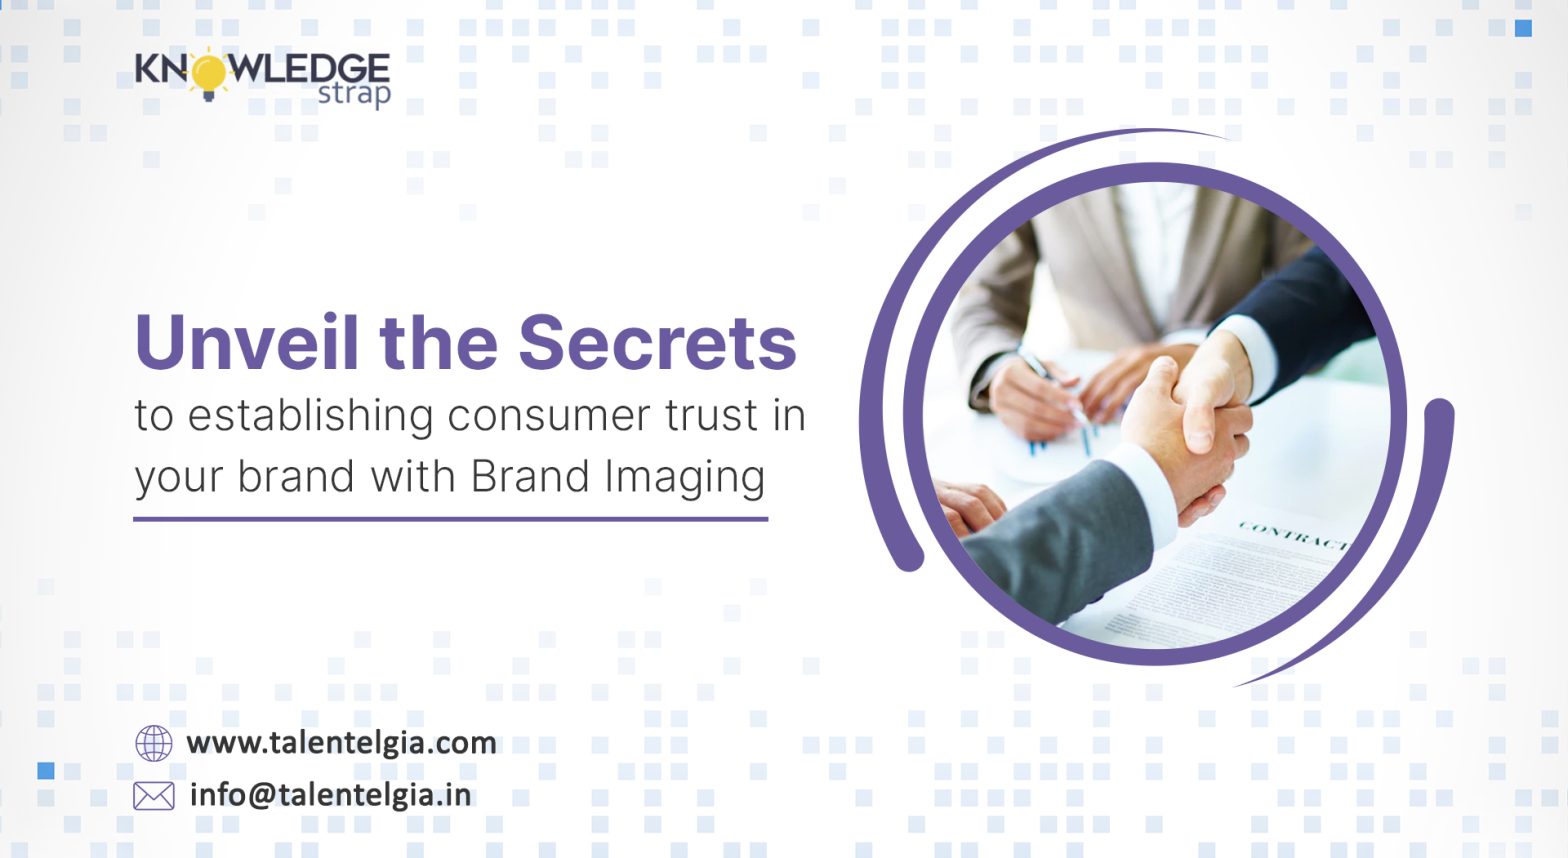 Unveil the Secrets to establishing consumer trust in your brand with Brand Imaging